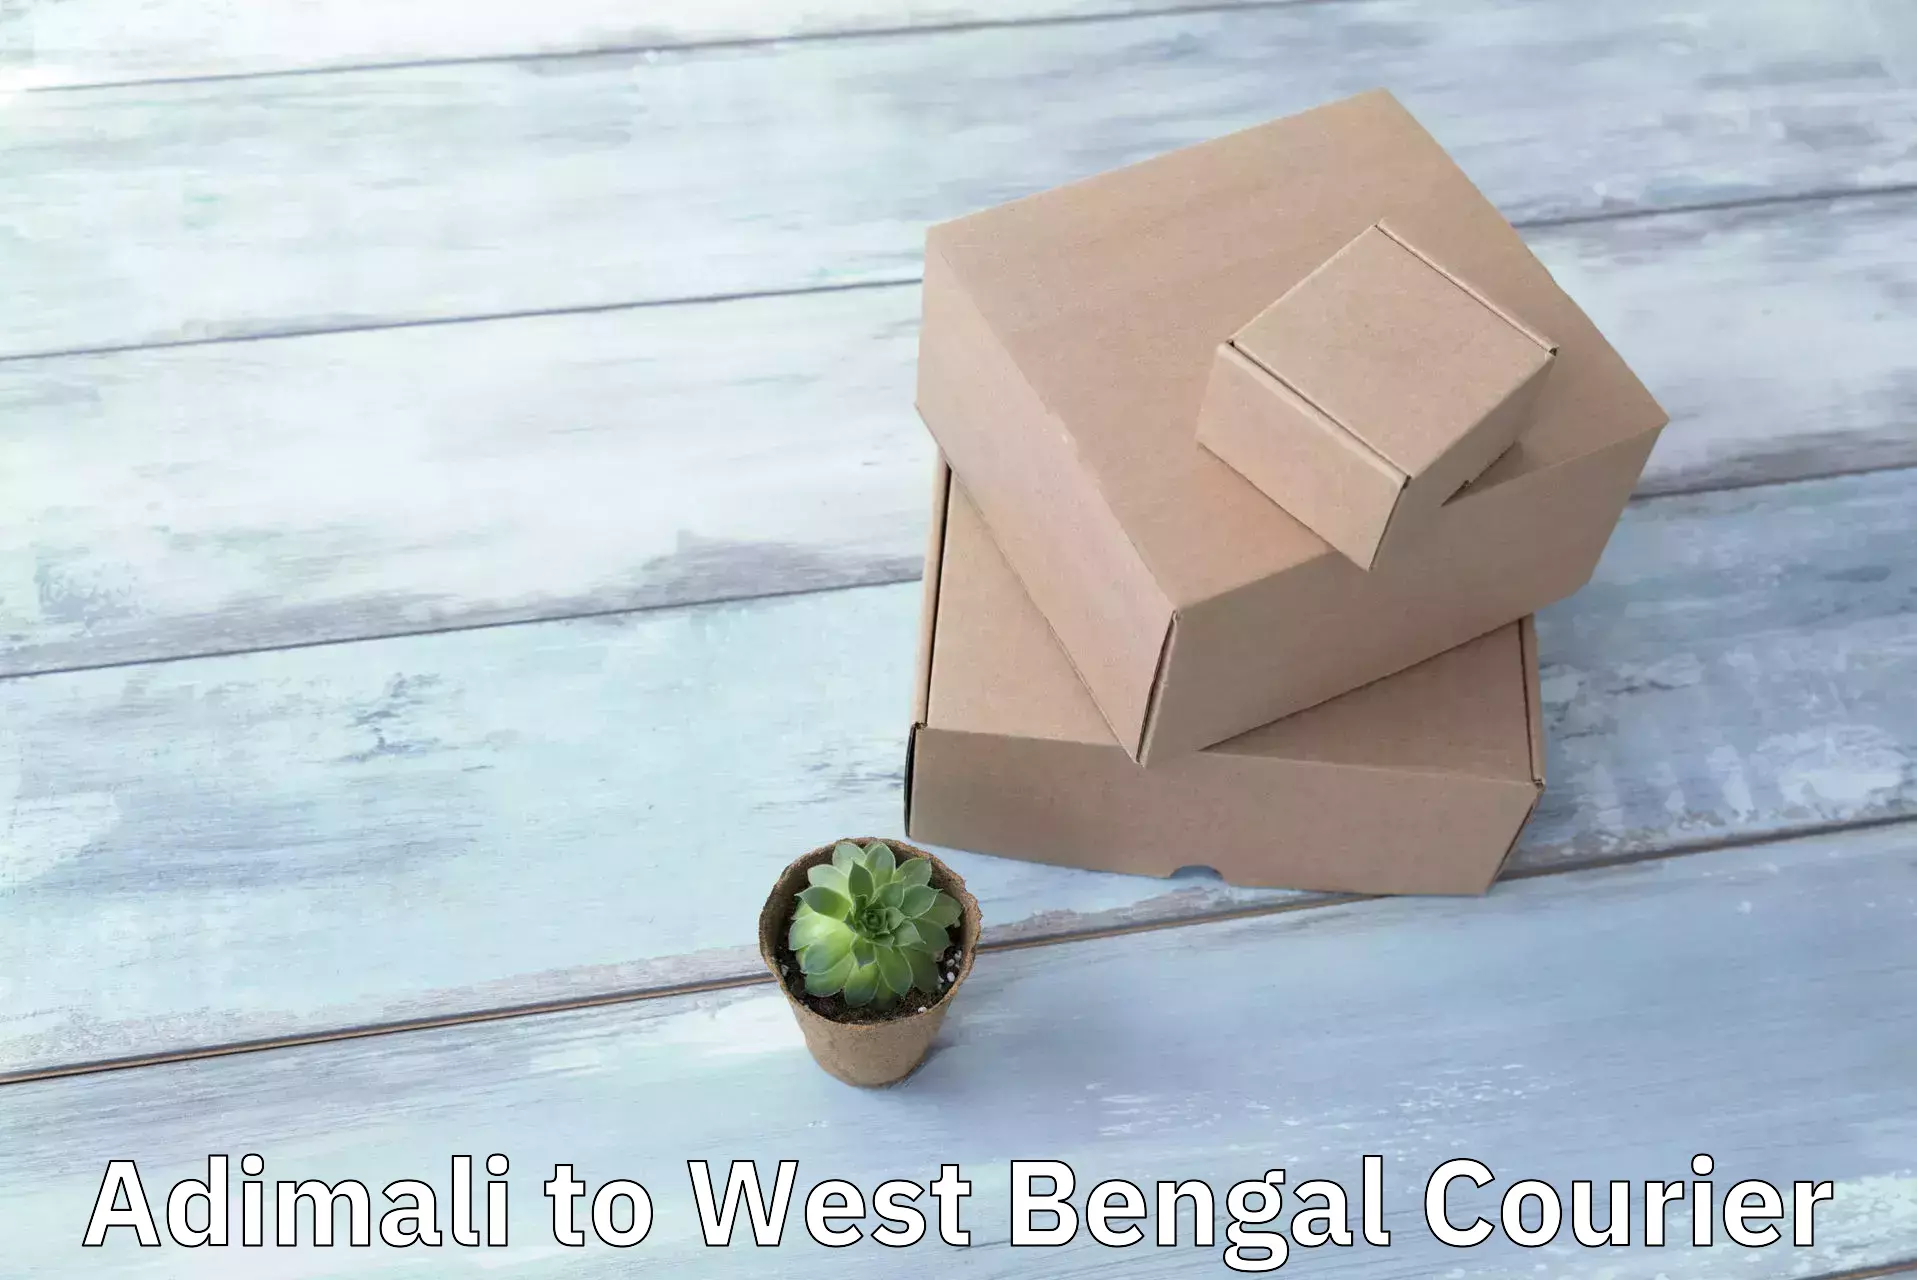 Efficient order fulfillment Adimali to West Bengal